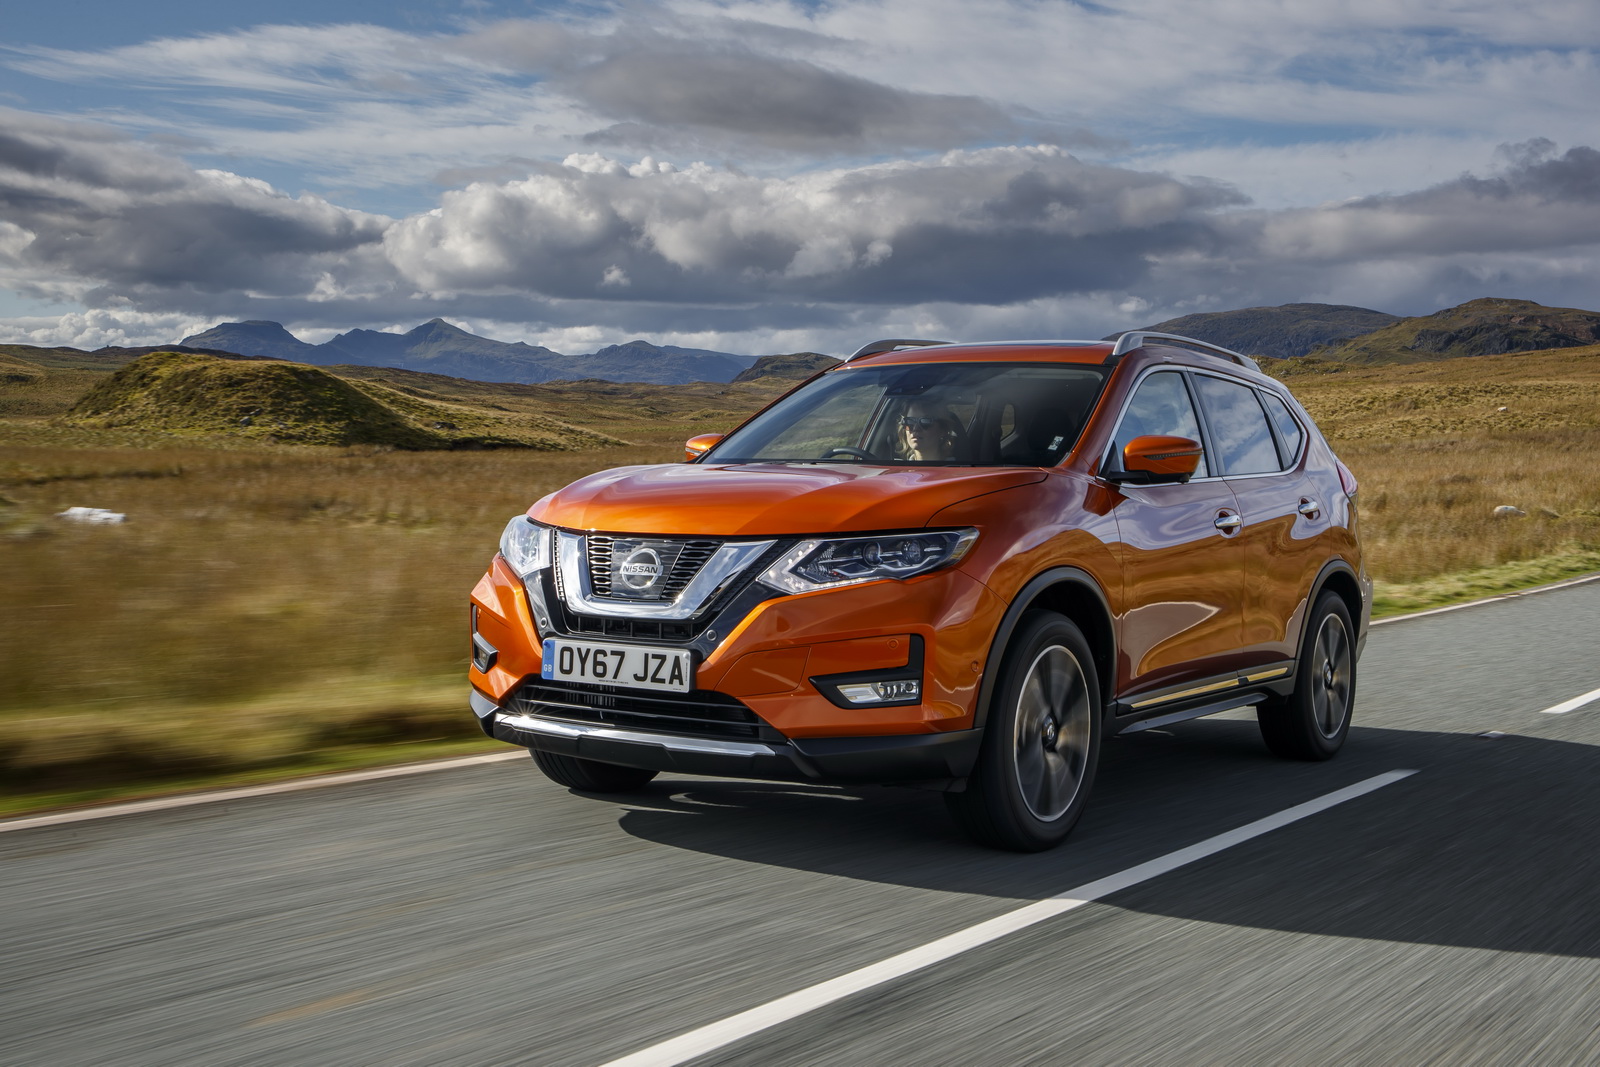 Refreshed 2018 Nissan XTrail Arrives In The UK, From £